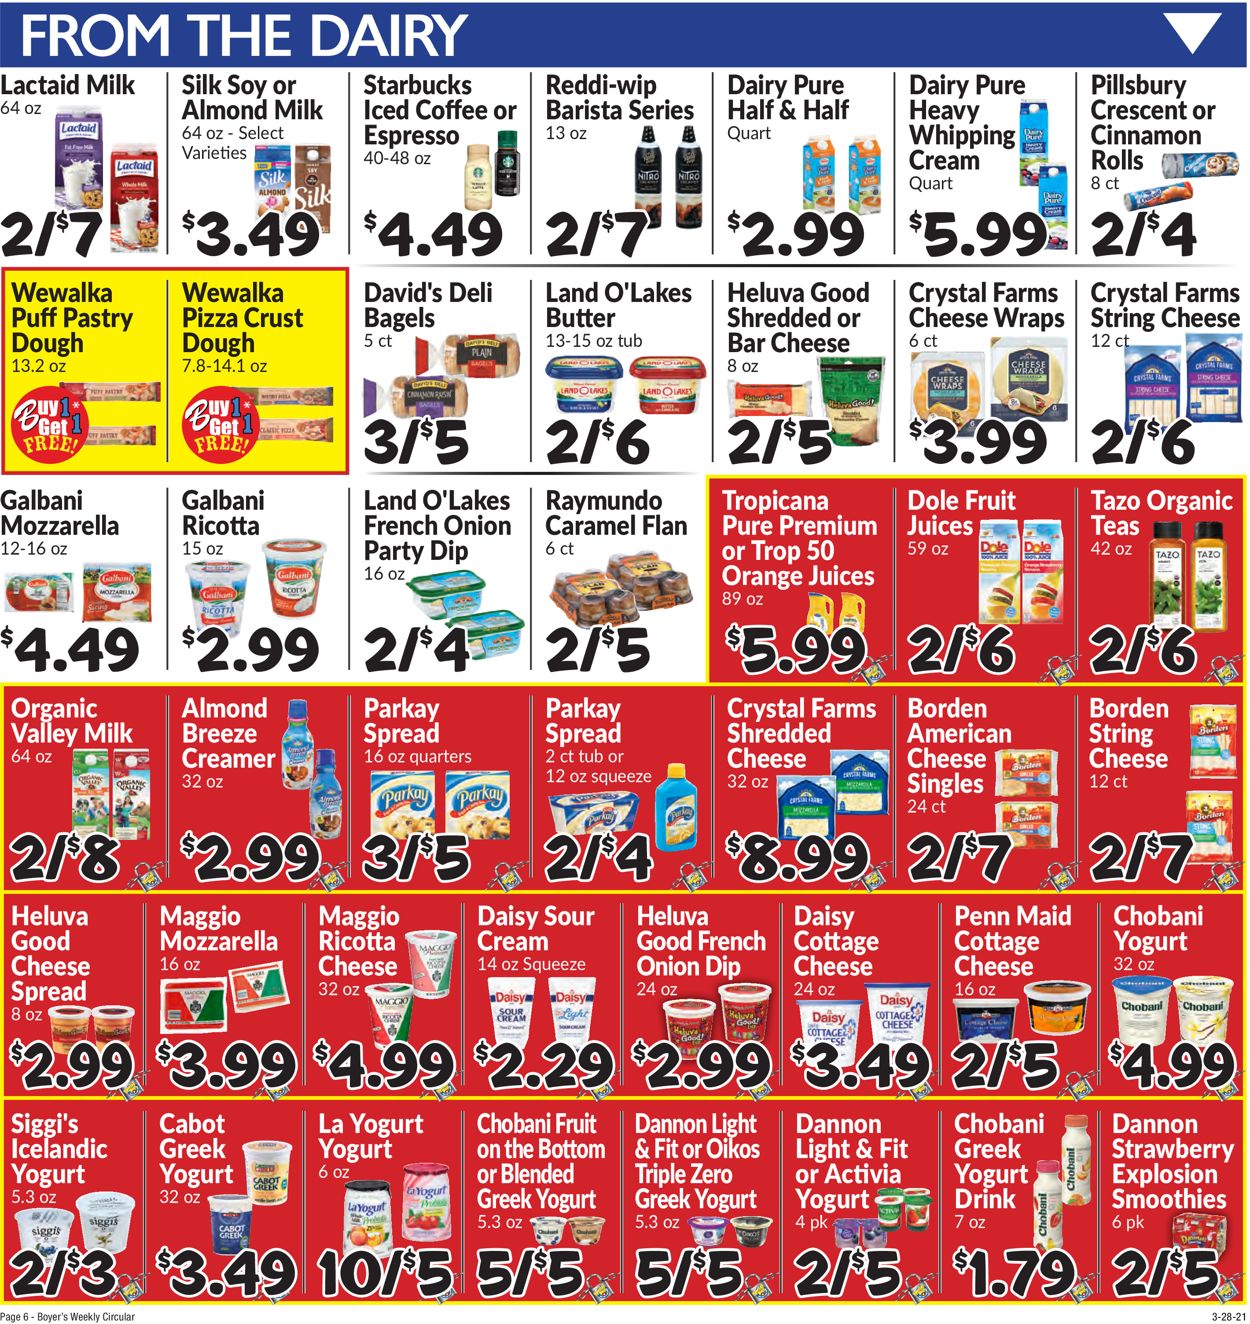 Boyer's Food Markets - Easter 2021 ad Weekly Ad Circular - valid 03/28-04/03/2021 (Page 9)